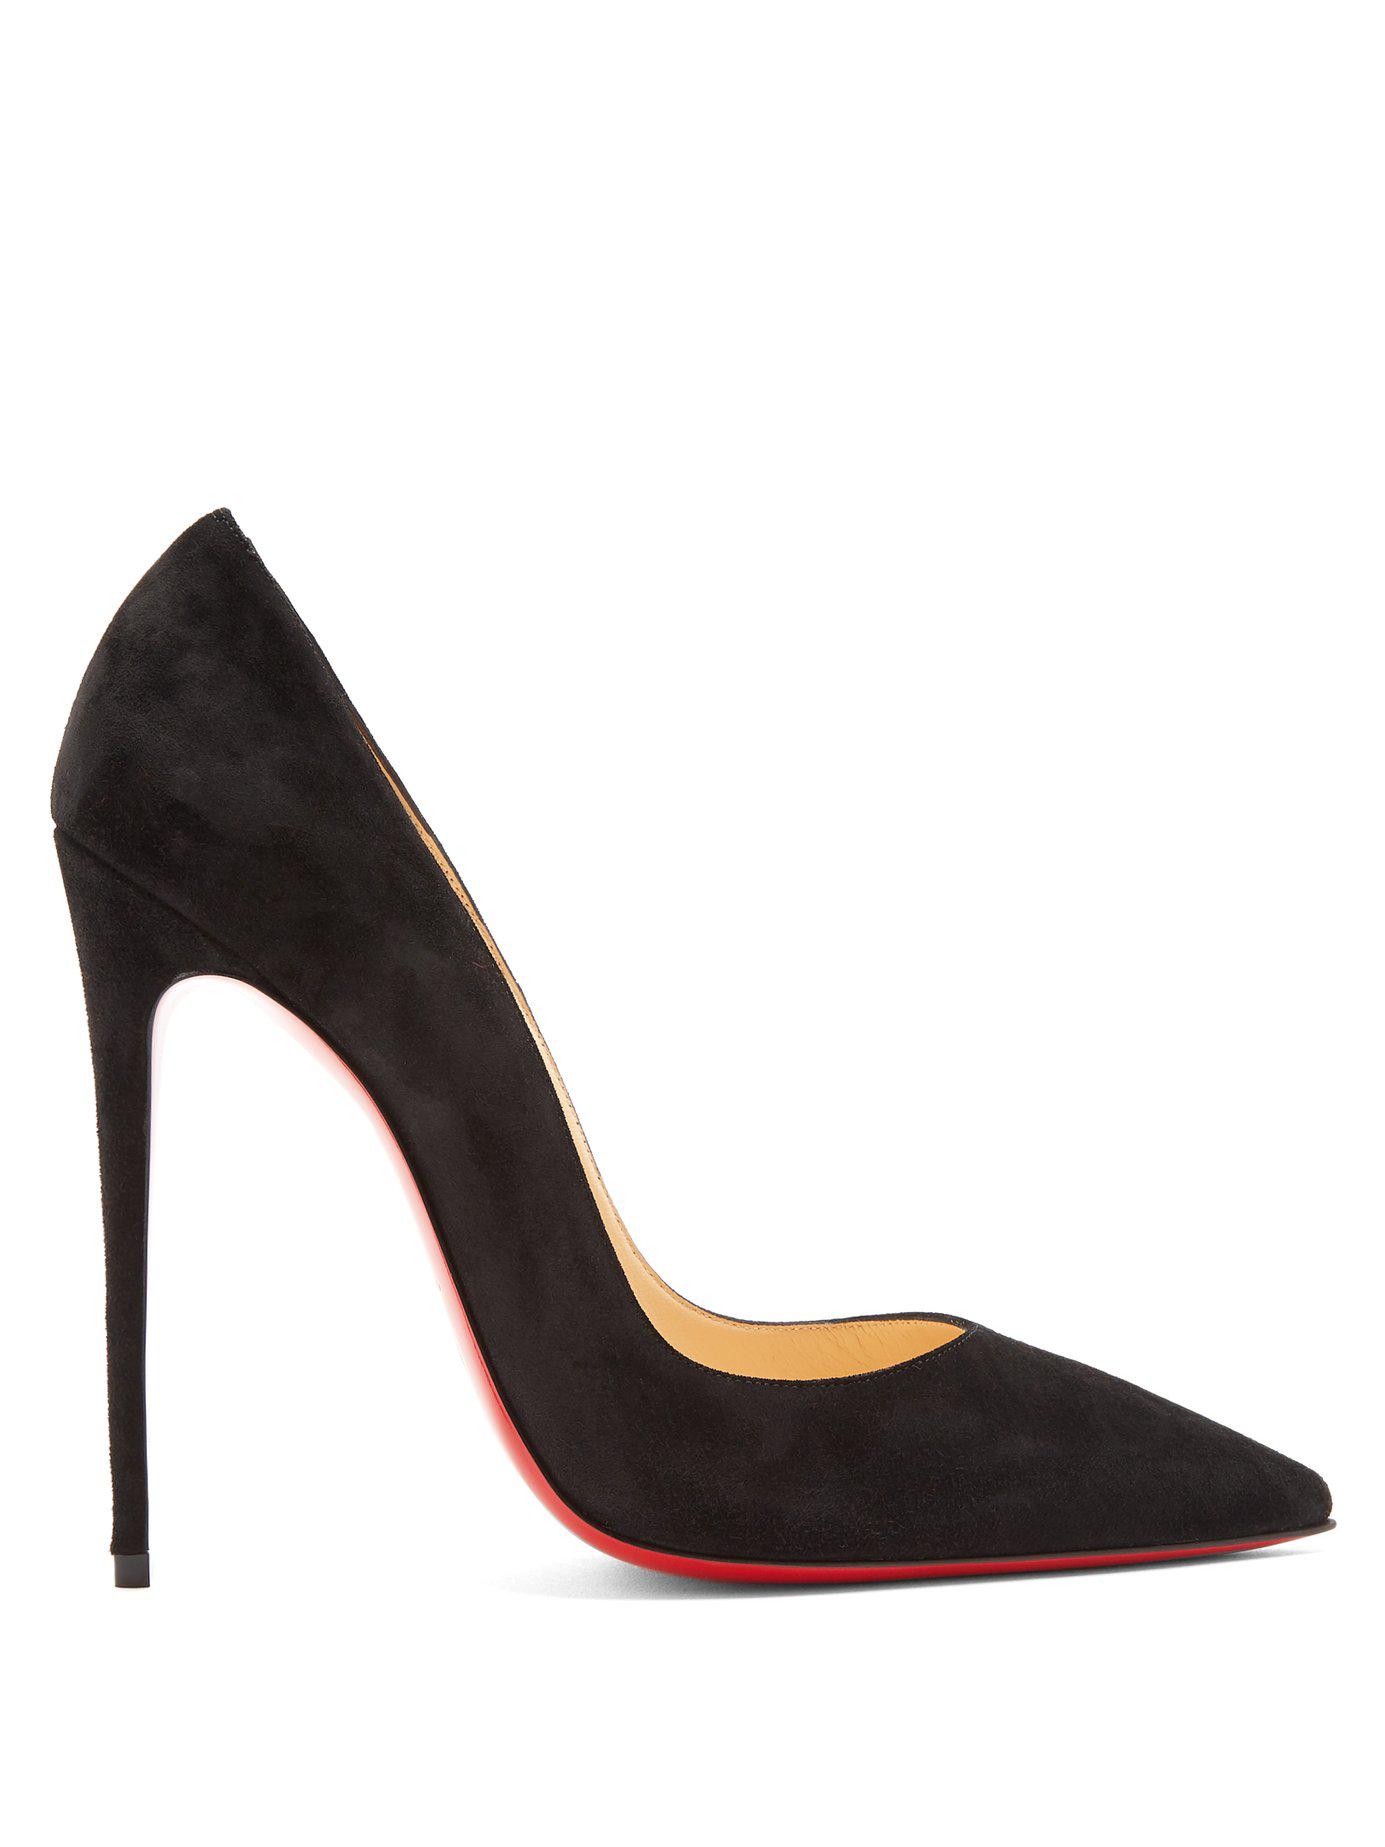 Lyst - Christian Louboutin So Kate 120mm Suede Pumps in Black